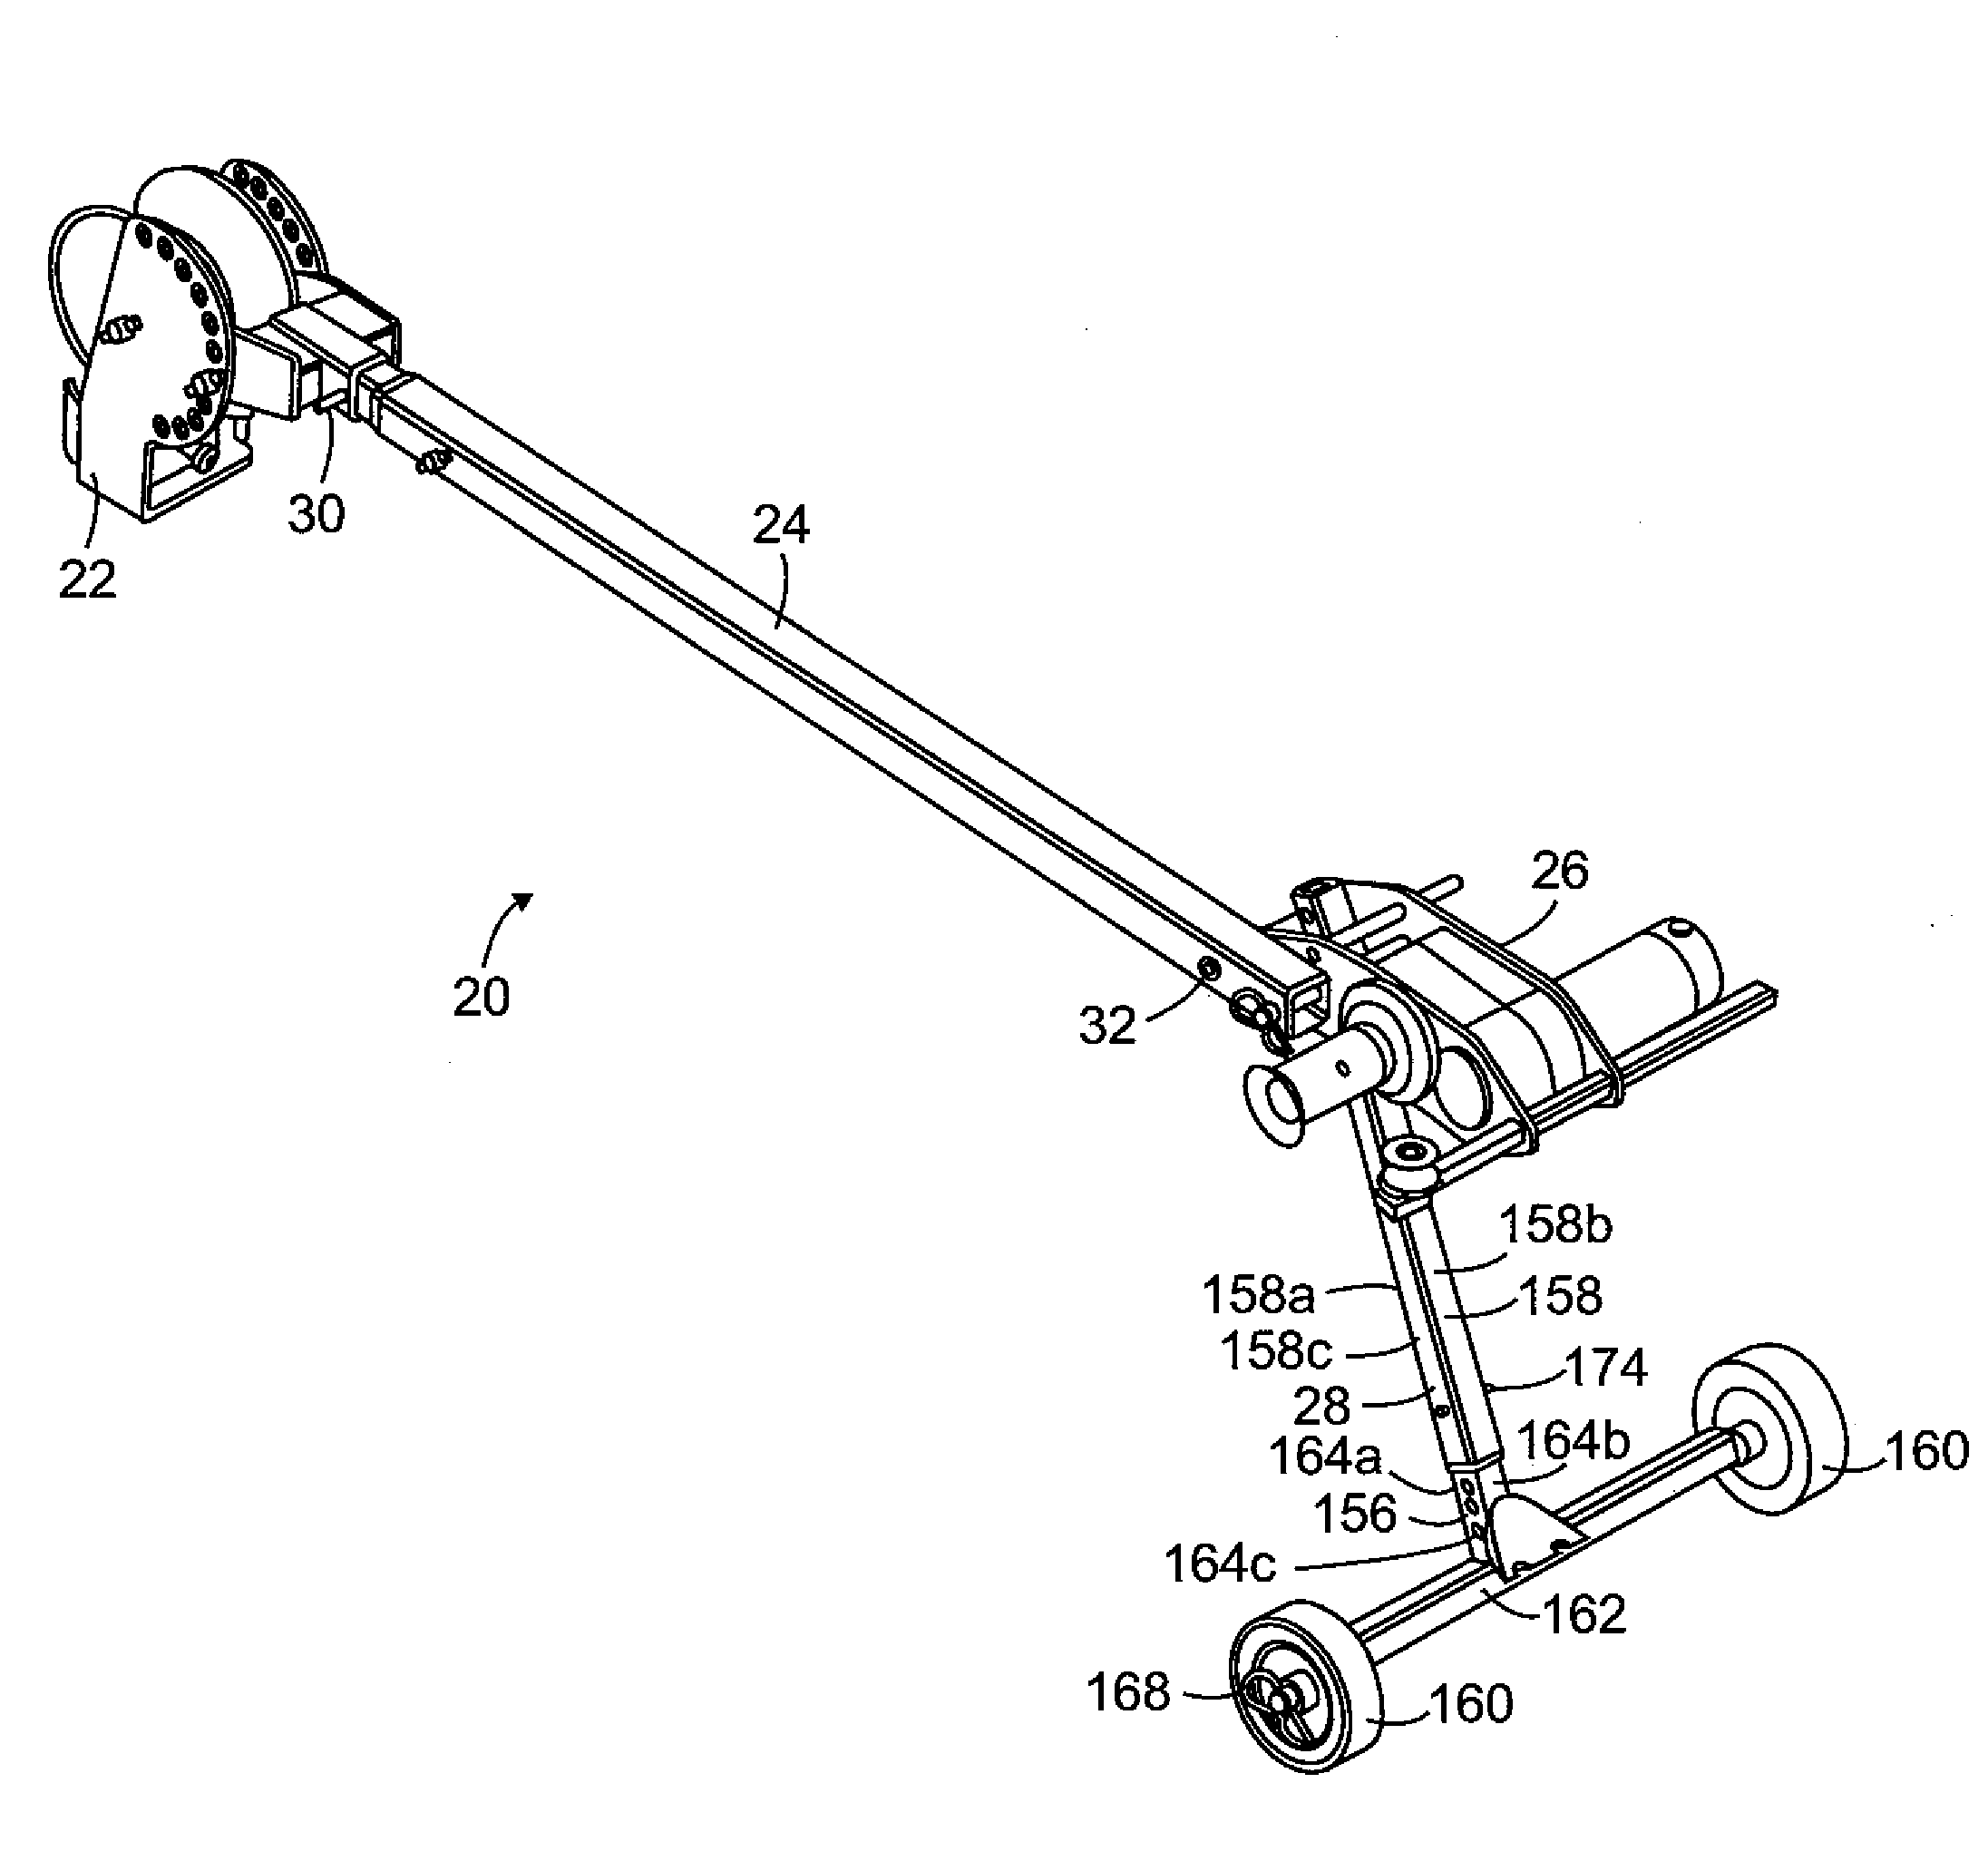 Cable puller with pivot adjuster for converting between upward and downward cable pulling